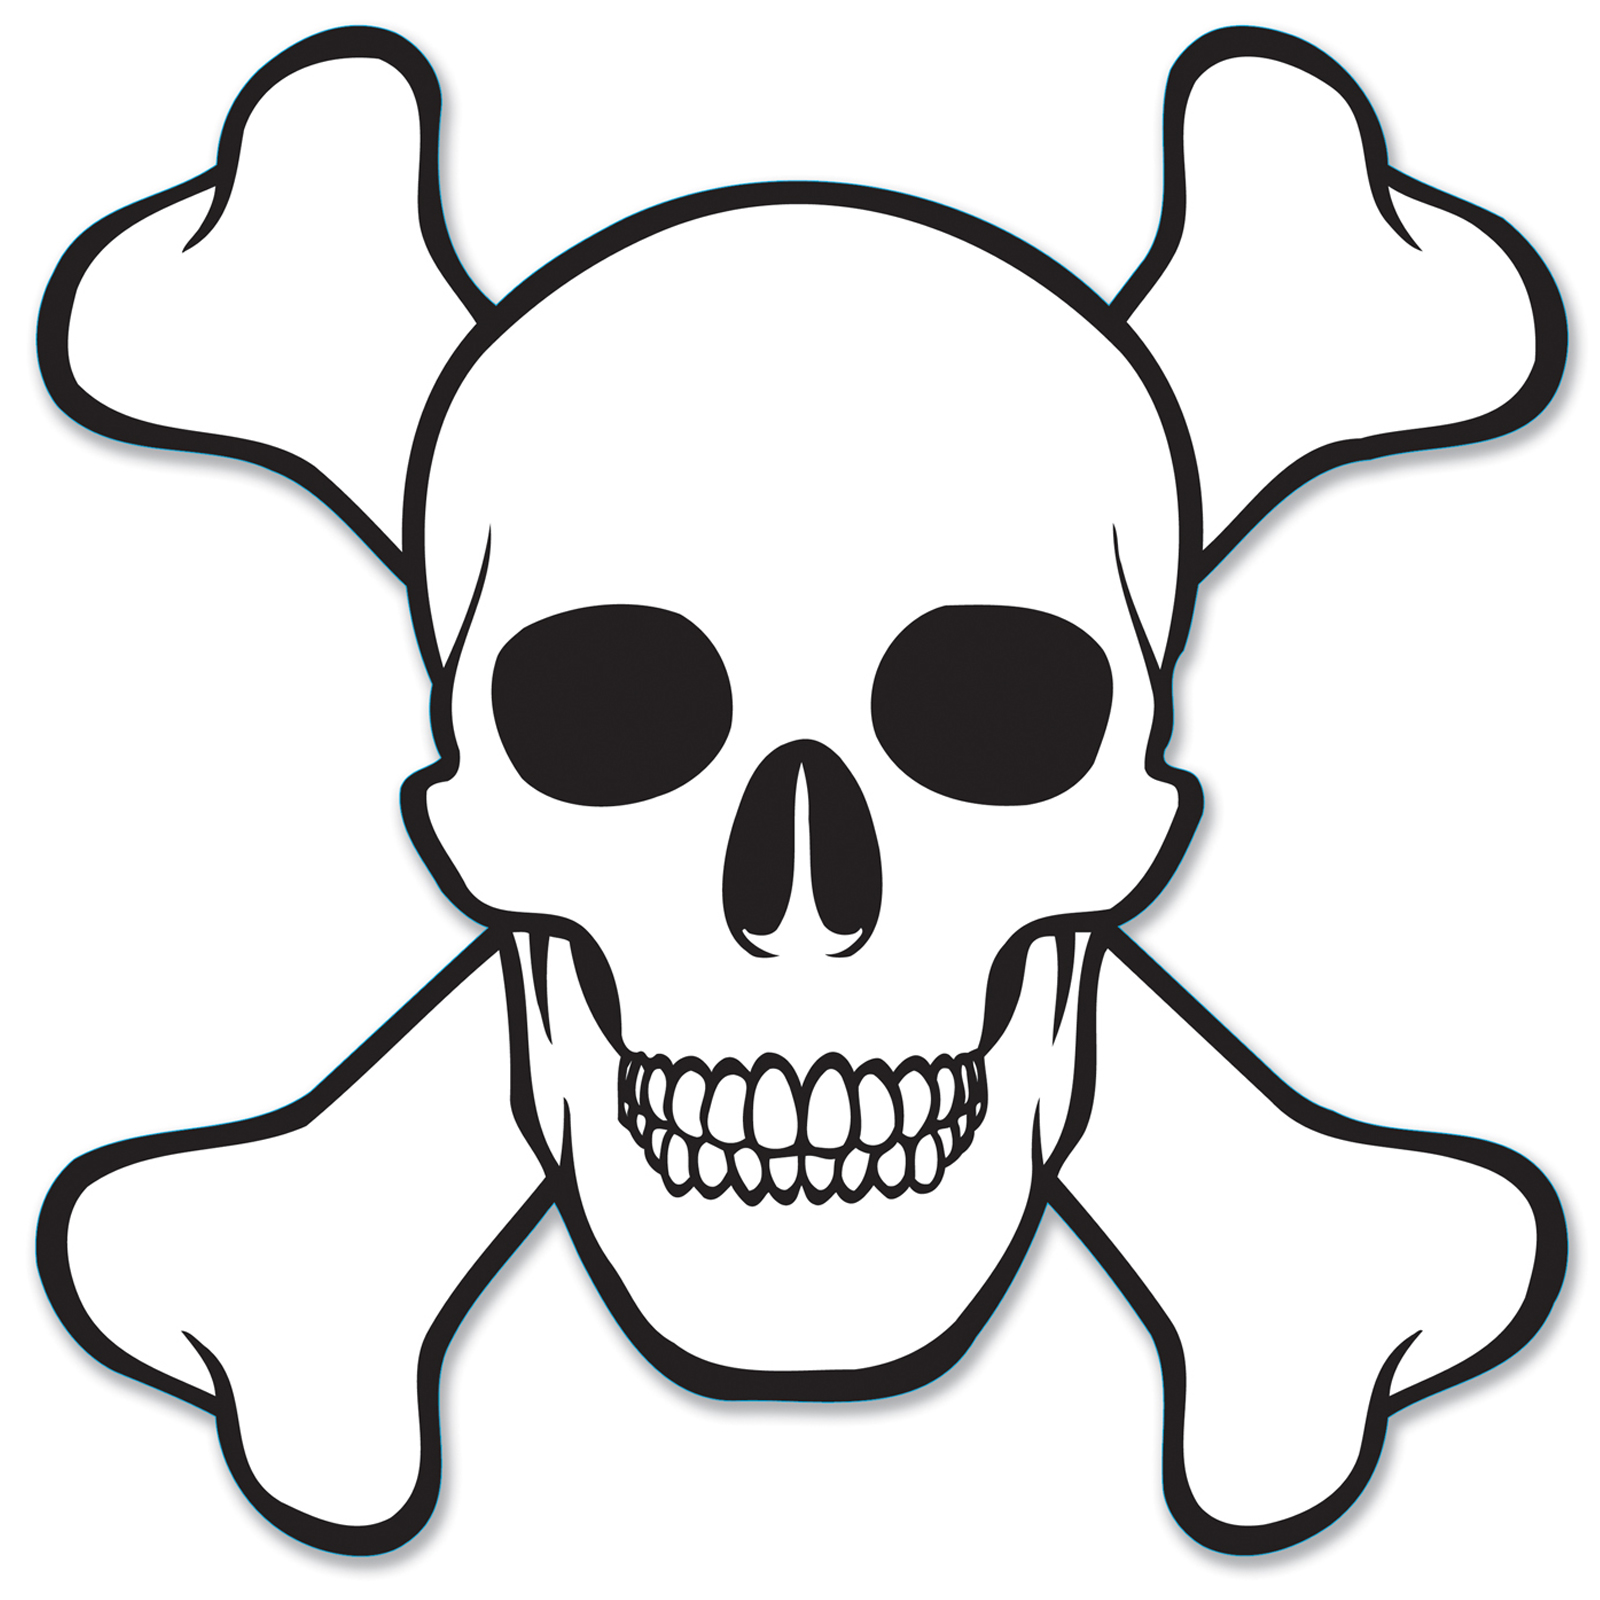 How To Draw Pirate Skull And Crossbones - Clipart library